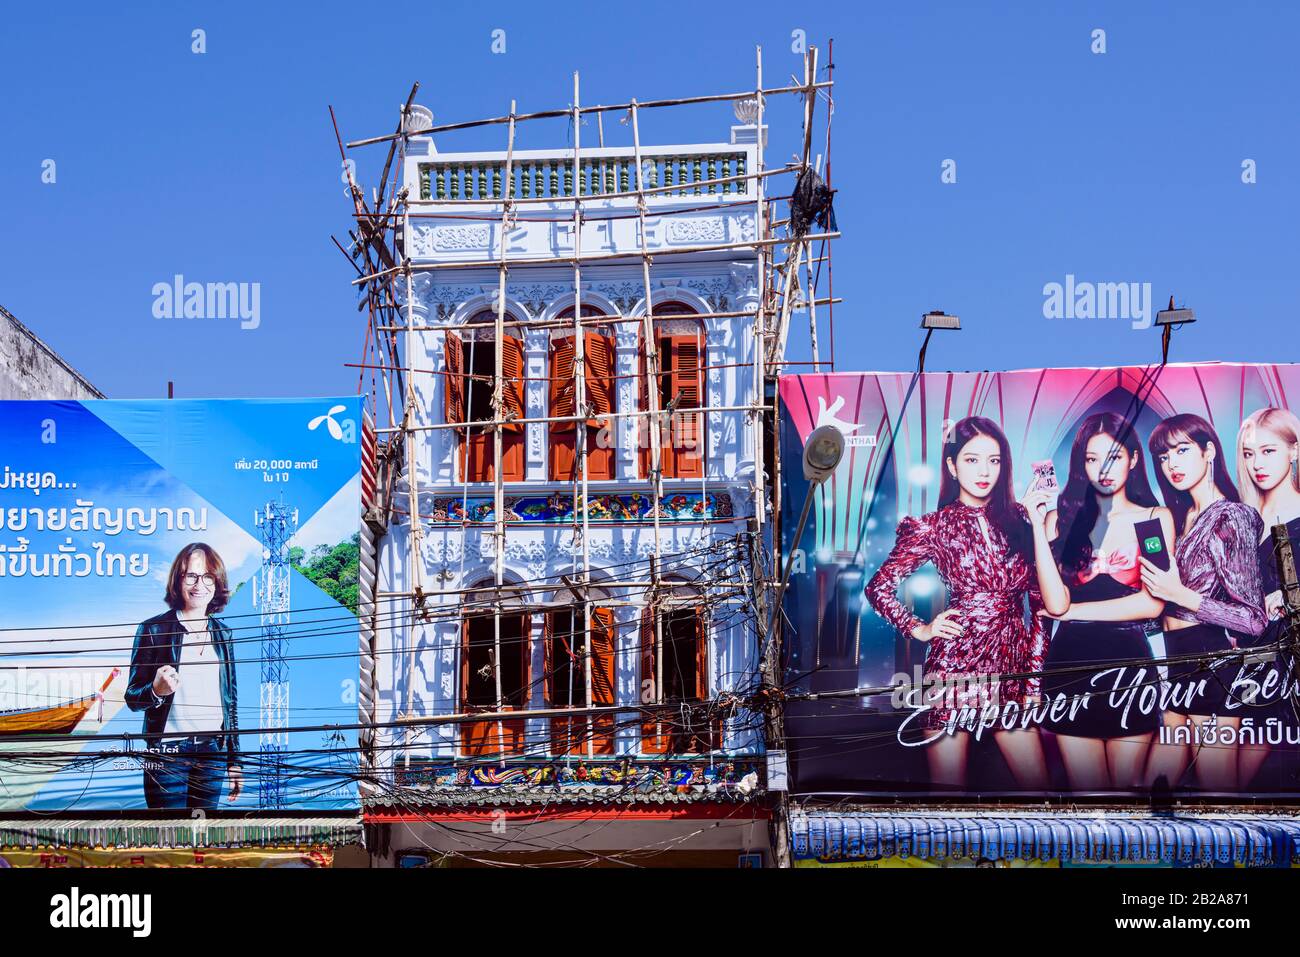 Bamboo scaffold poles outside a traditional building undergoing restoration repair, surrounded by advertising billboards, Phuket, Thailand Stock Photo